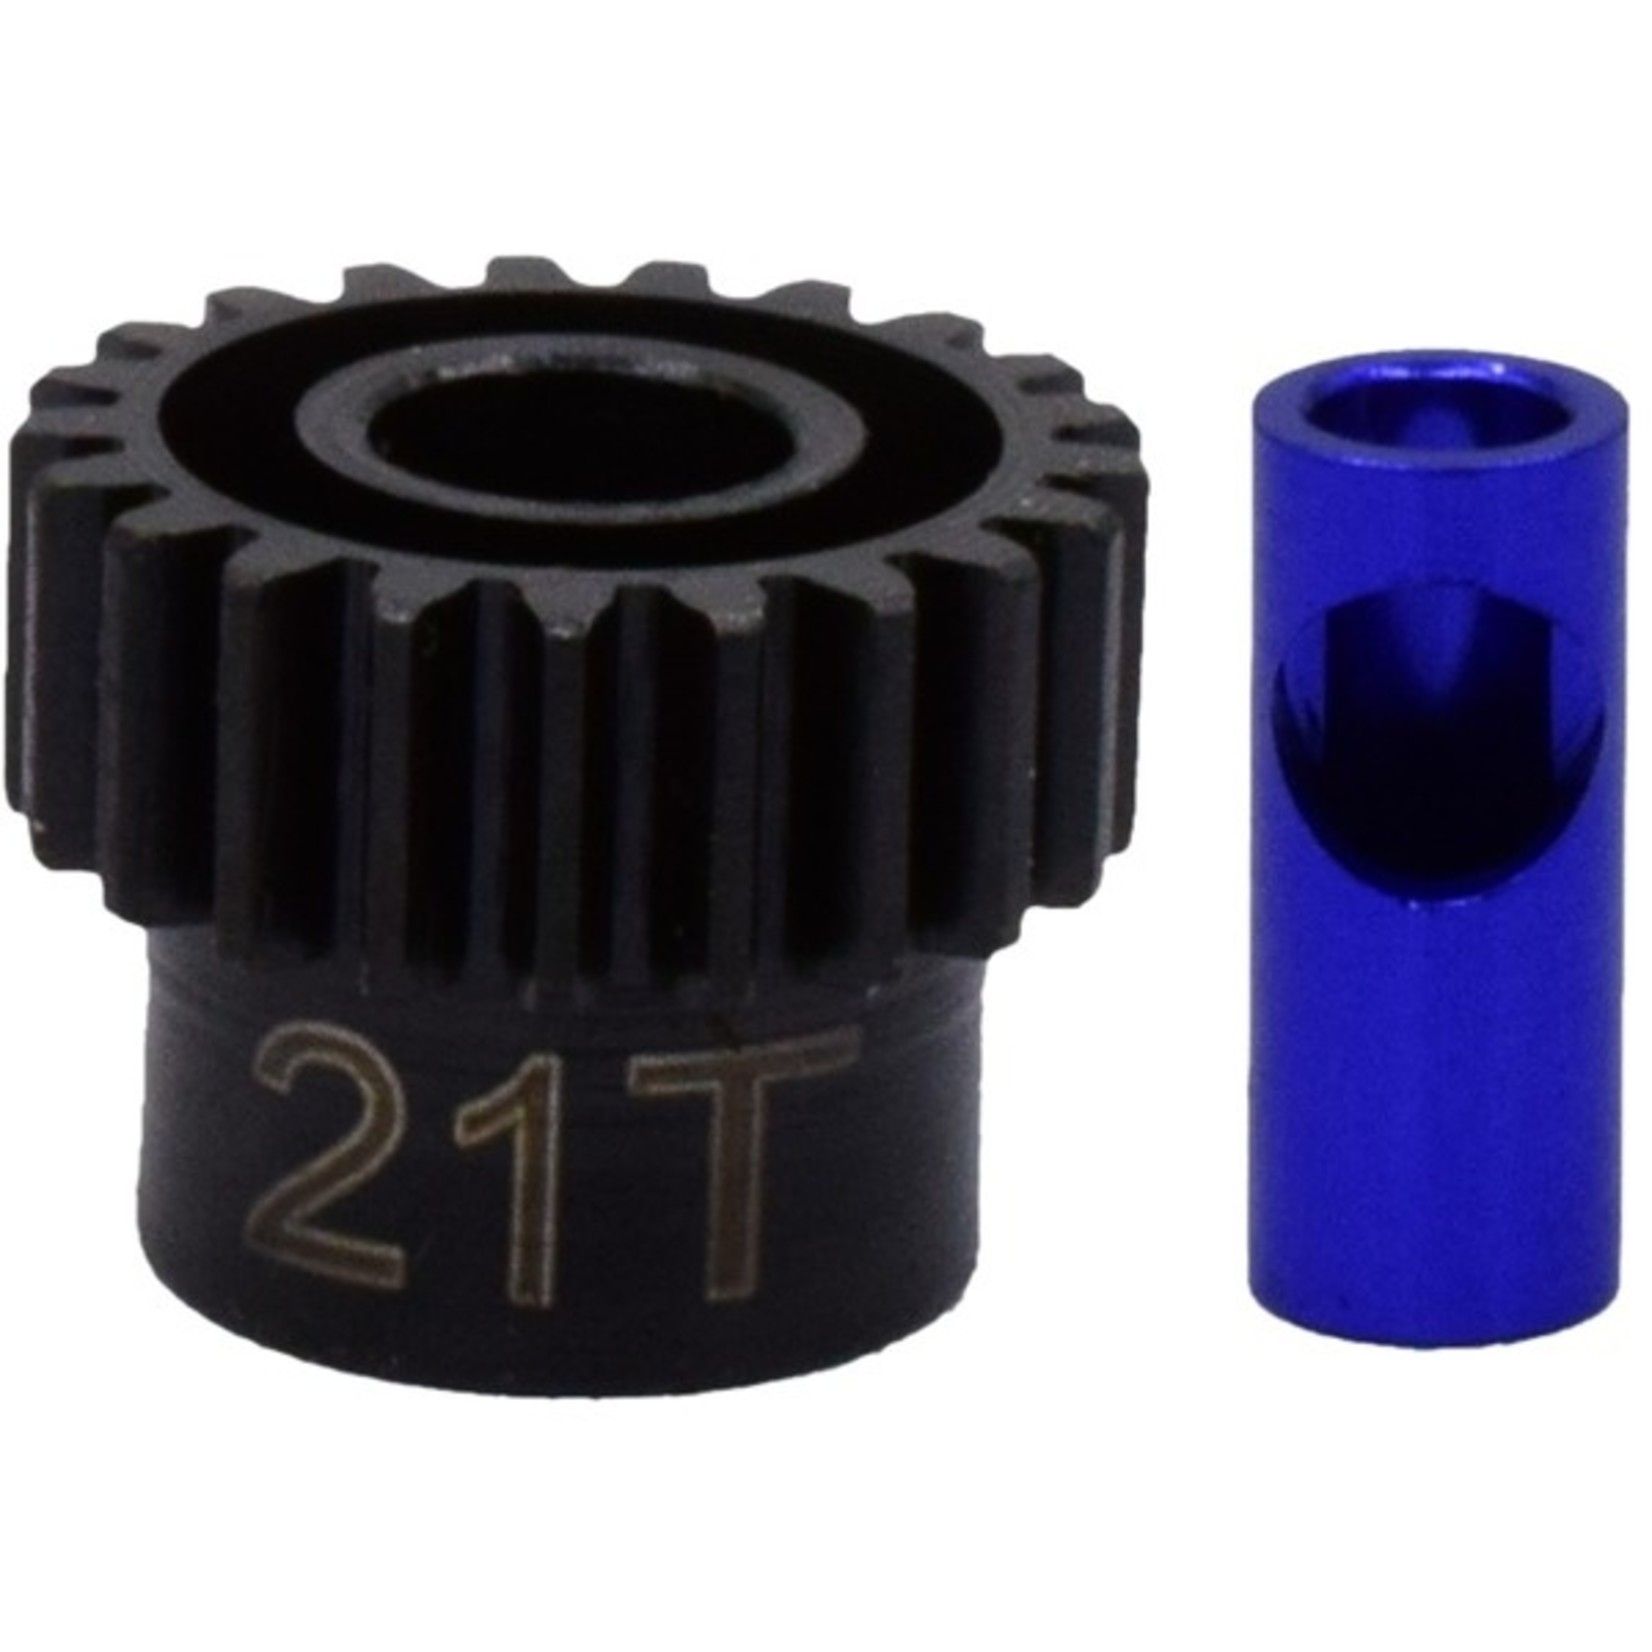 Hot Racing 21T, 0.6 Module Steel Pinion Gear, for 5mm/1/8in Motor Shaf